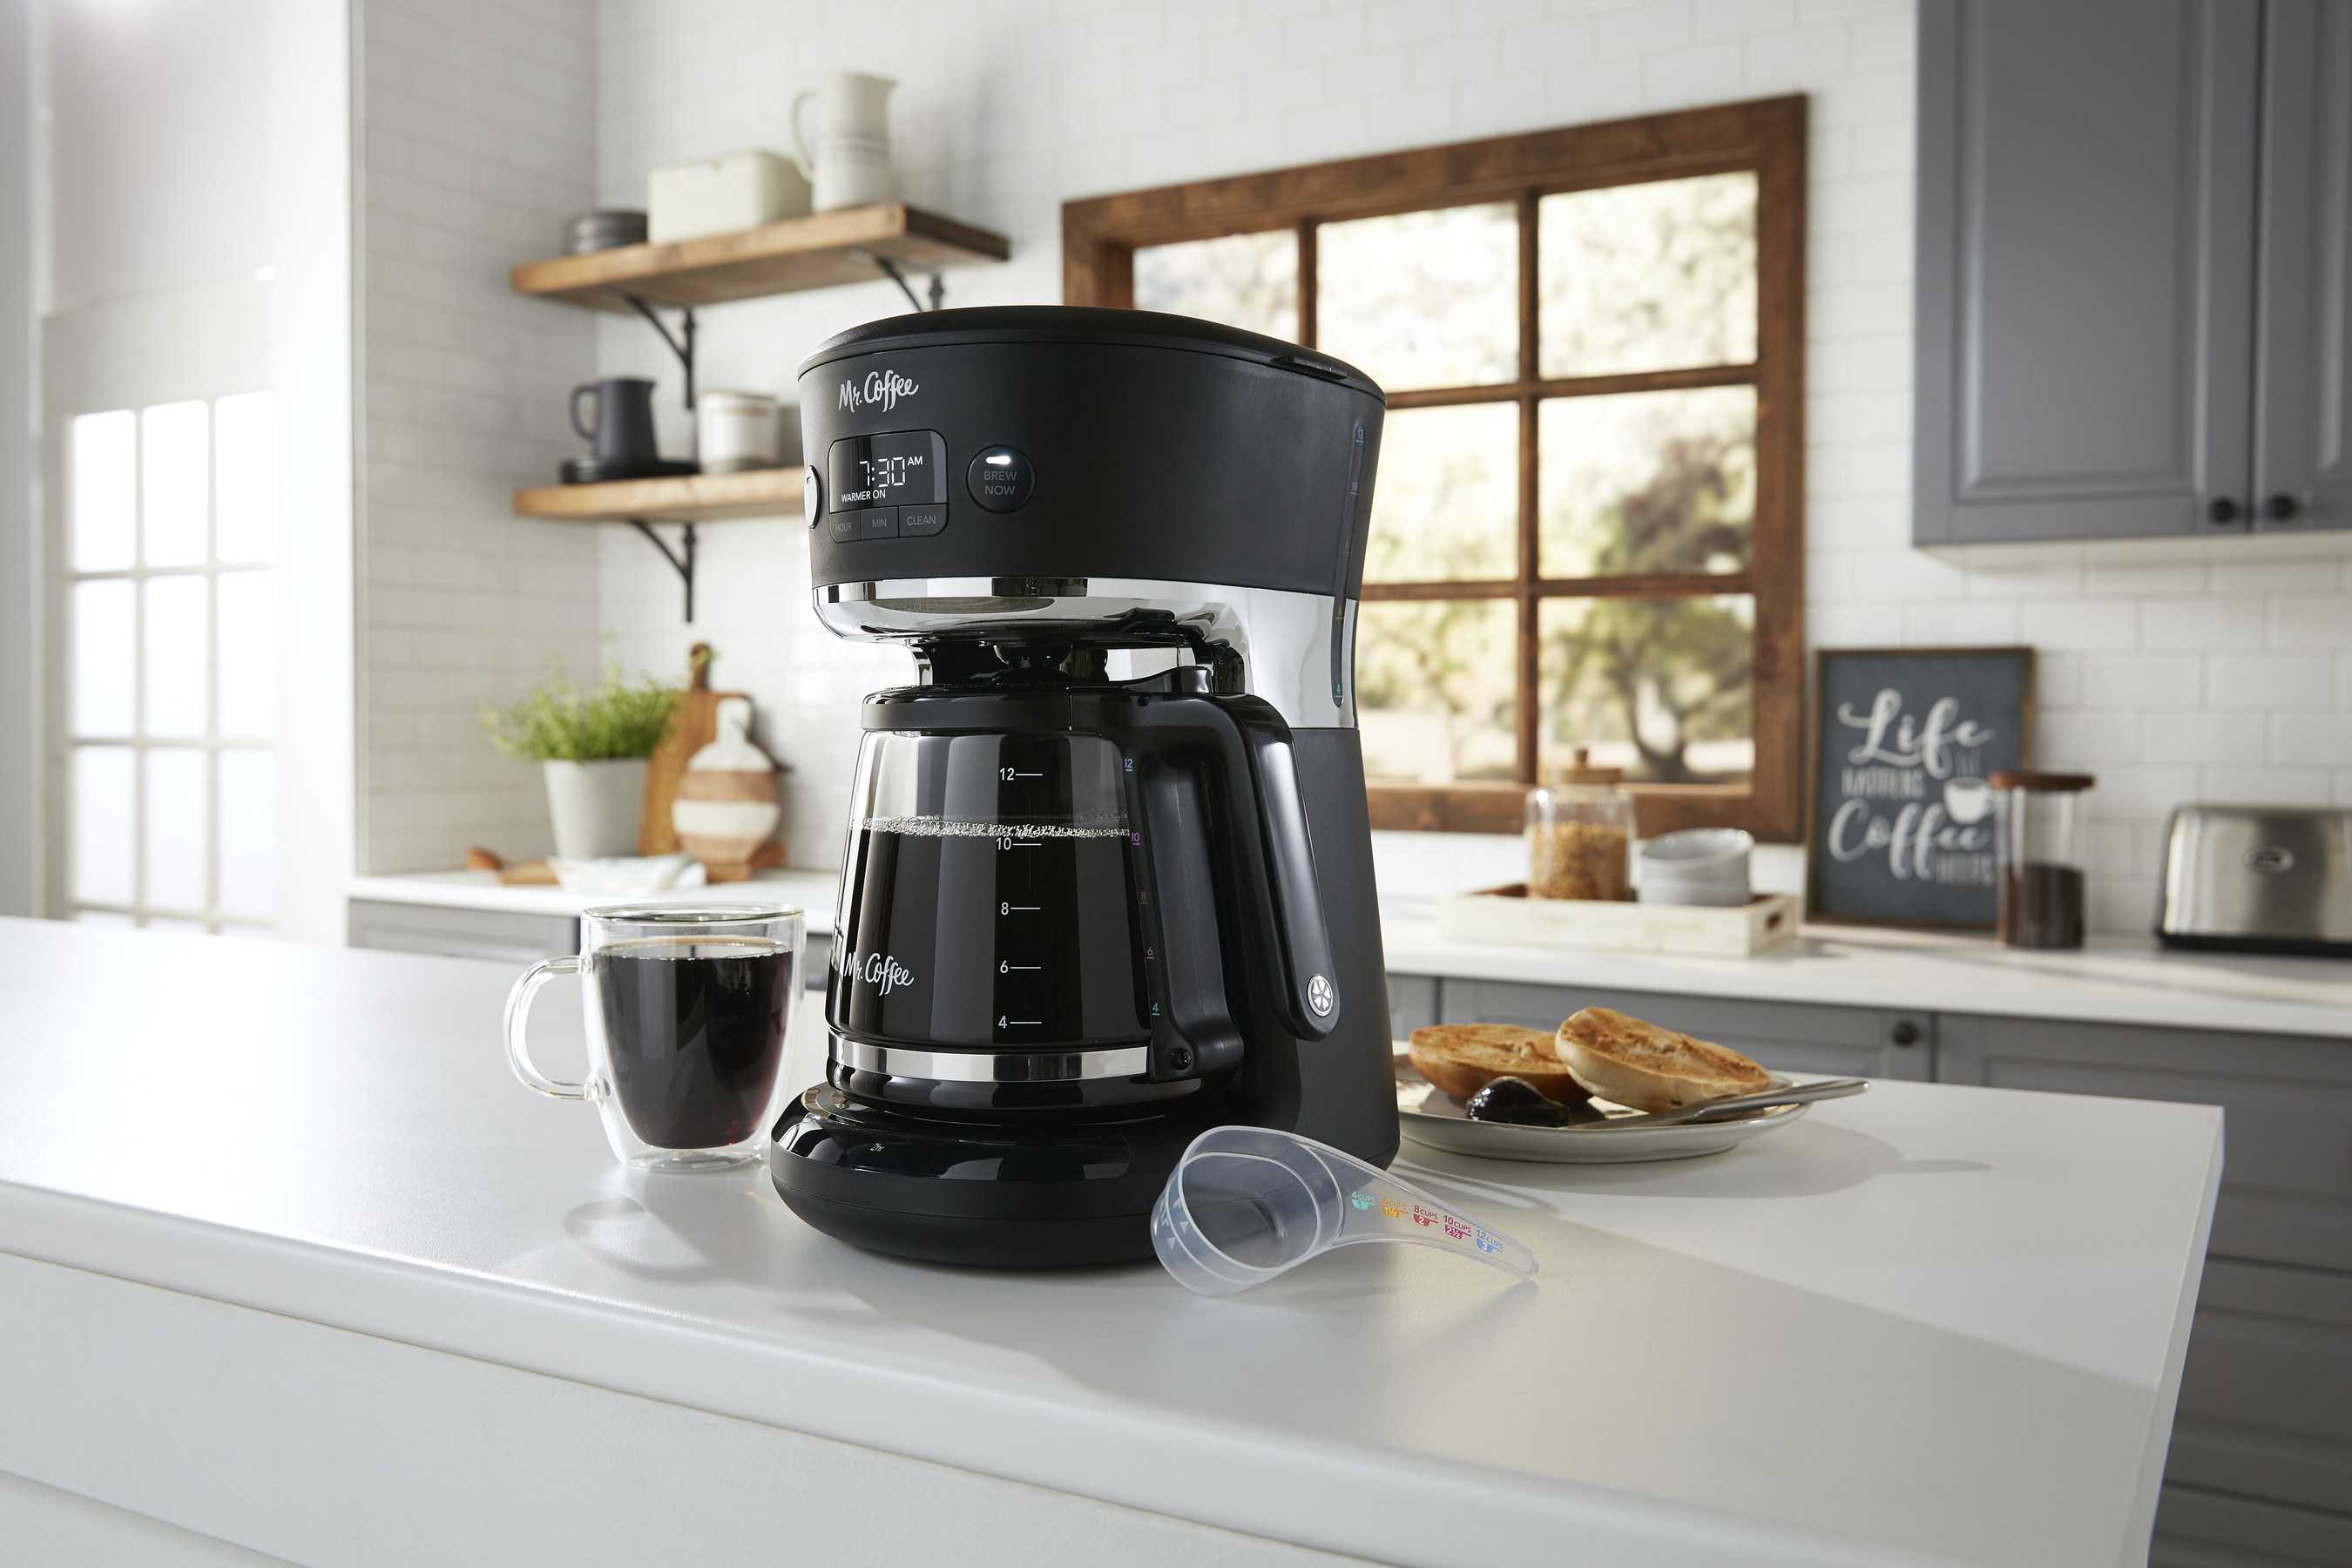 The Mr. Coffee introduces new 12cup programmable coffeemaker